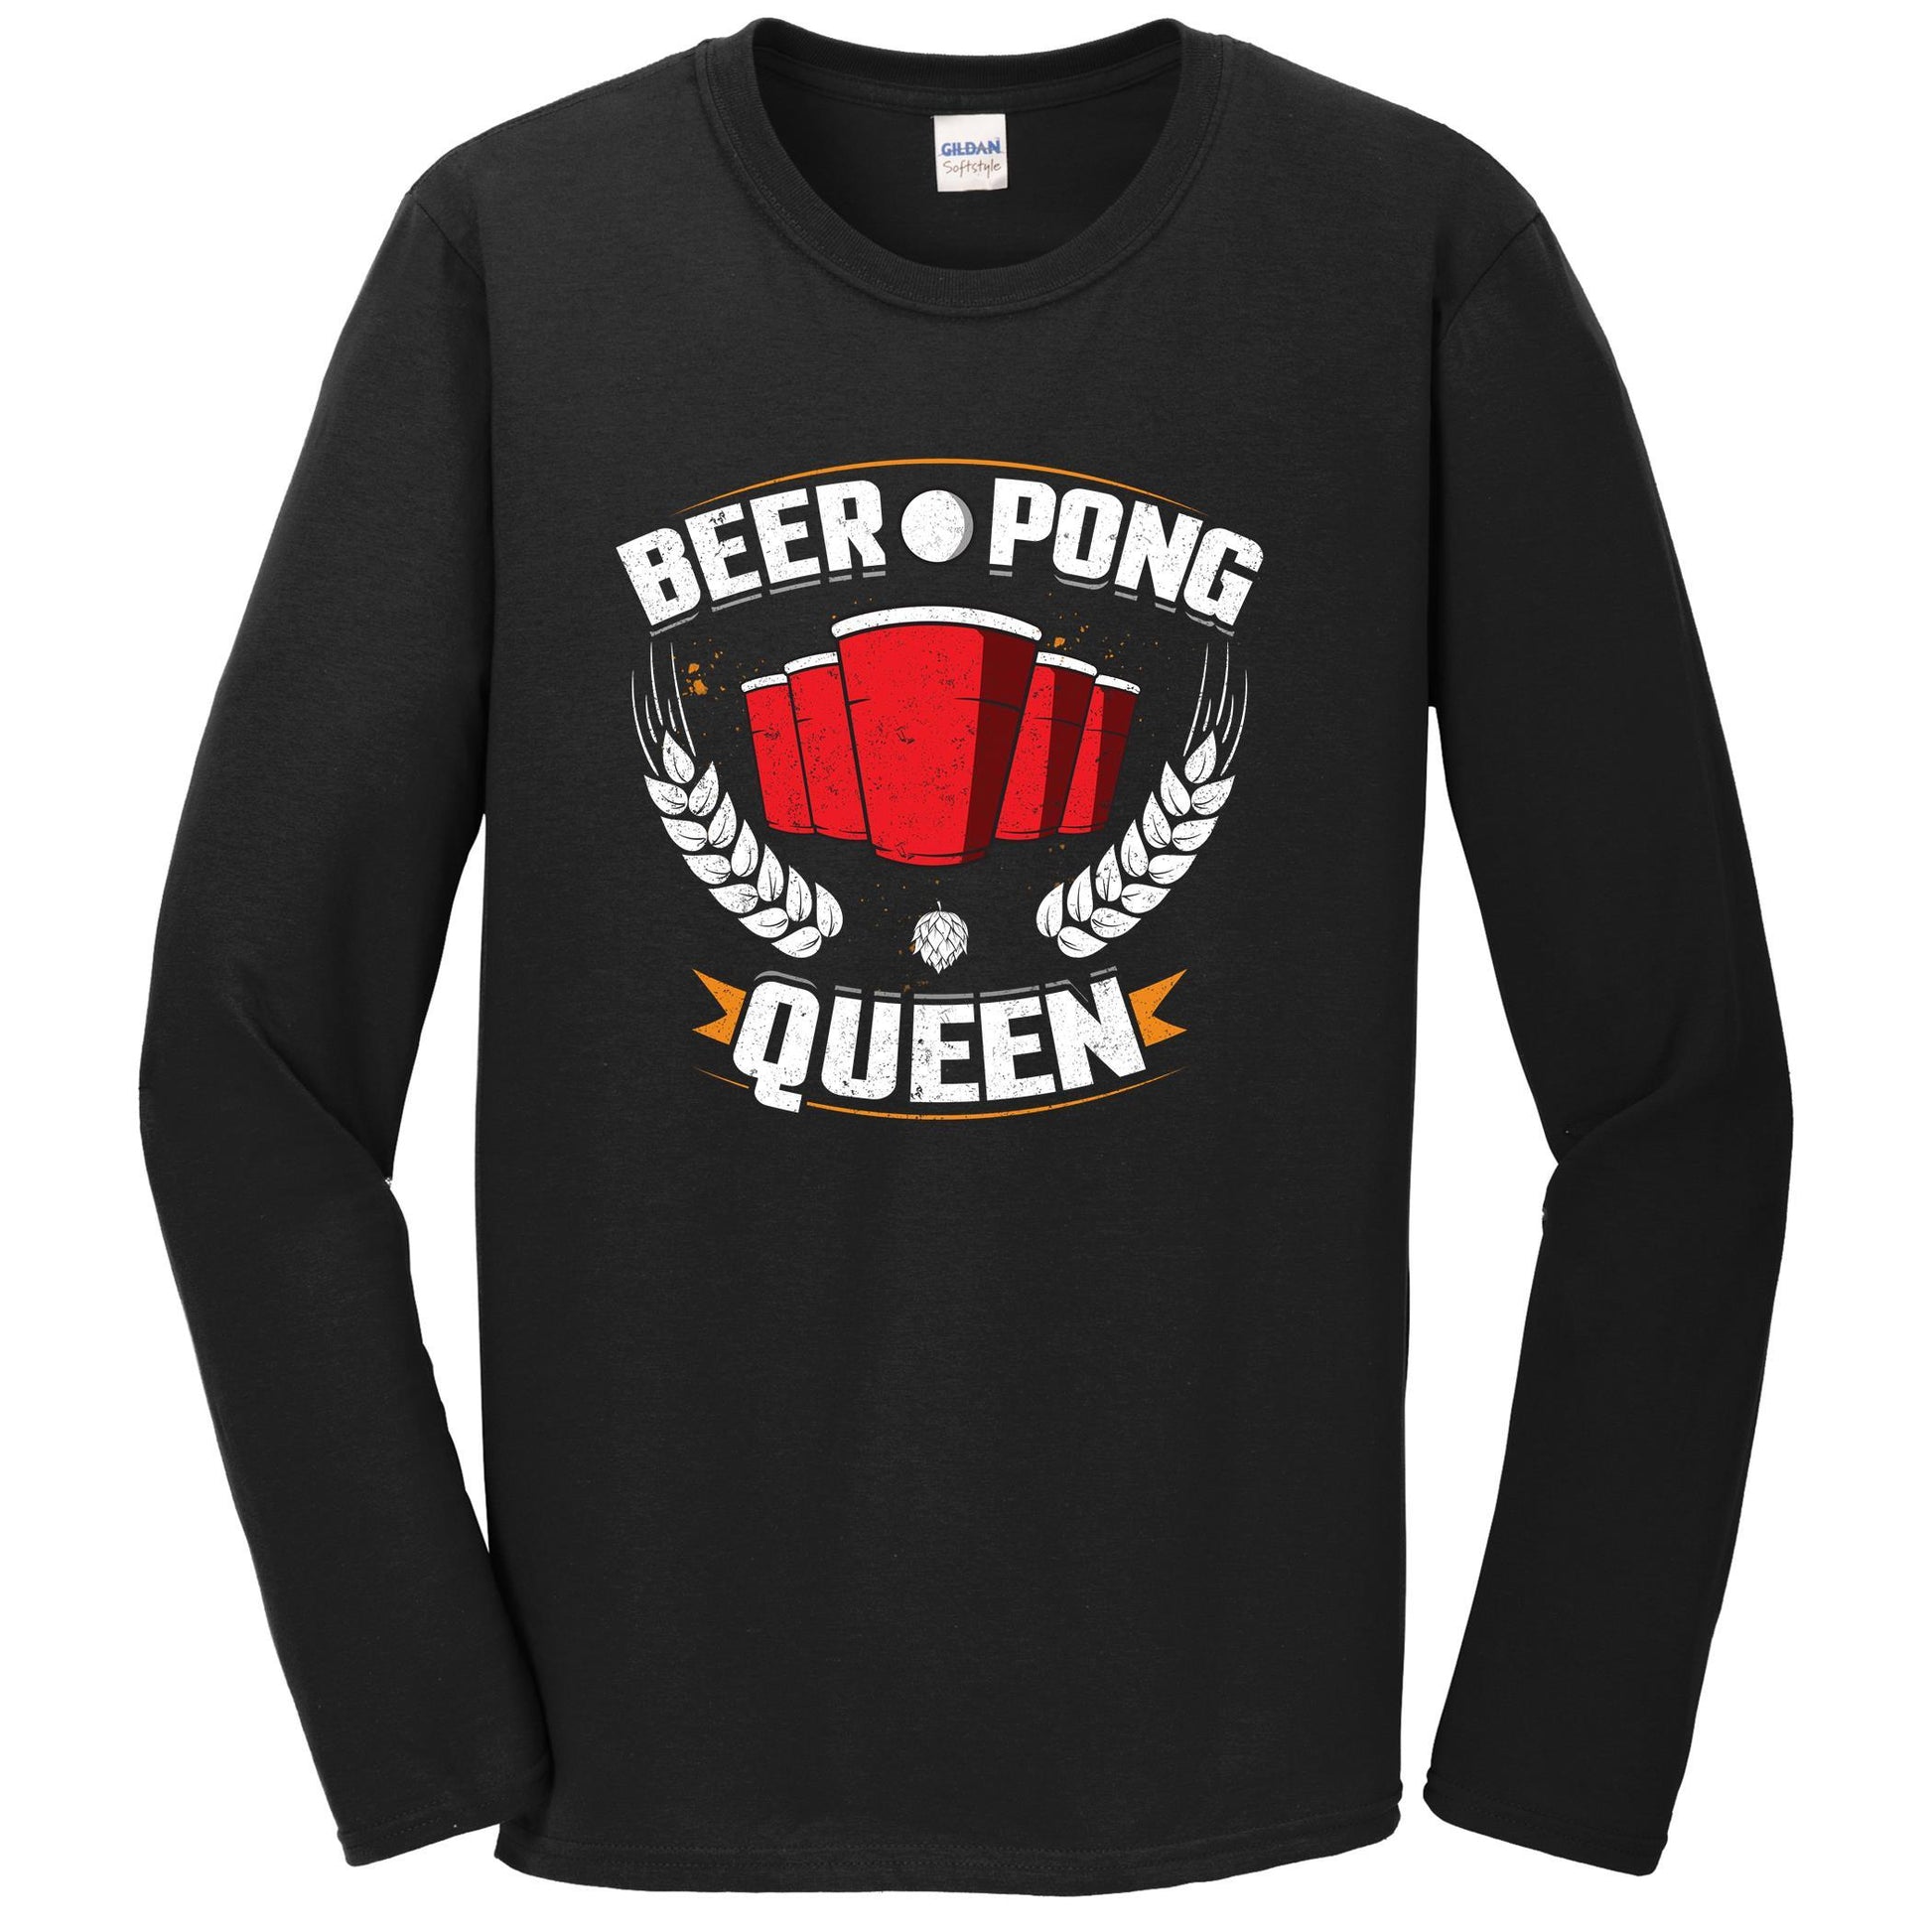 Beer Pong Queen Funny Drinking Long Sleeve Shirt